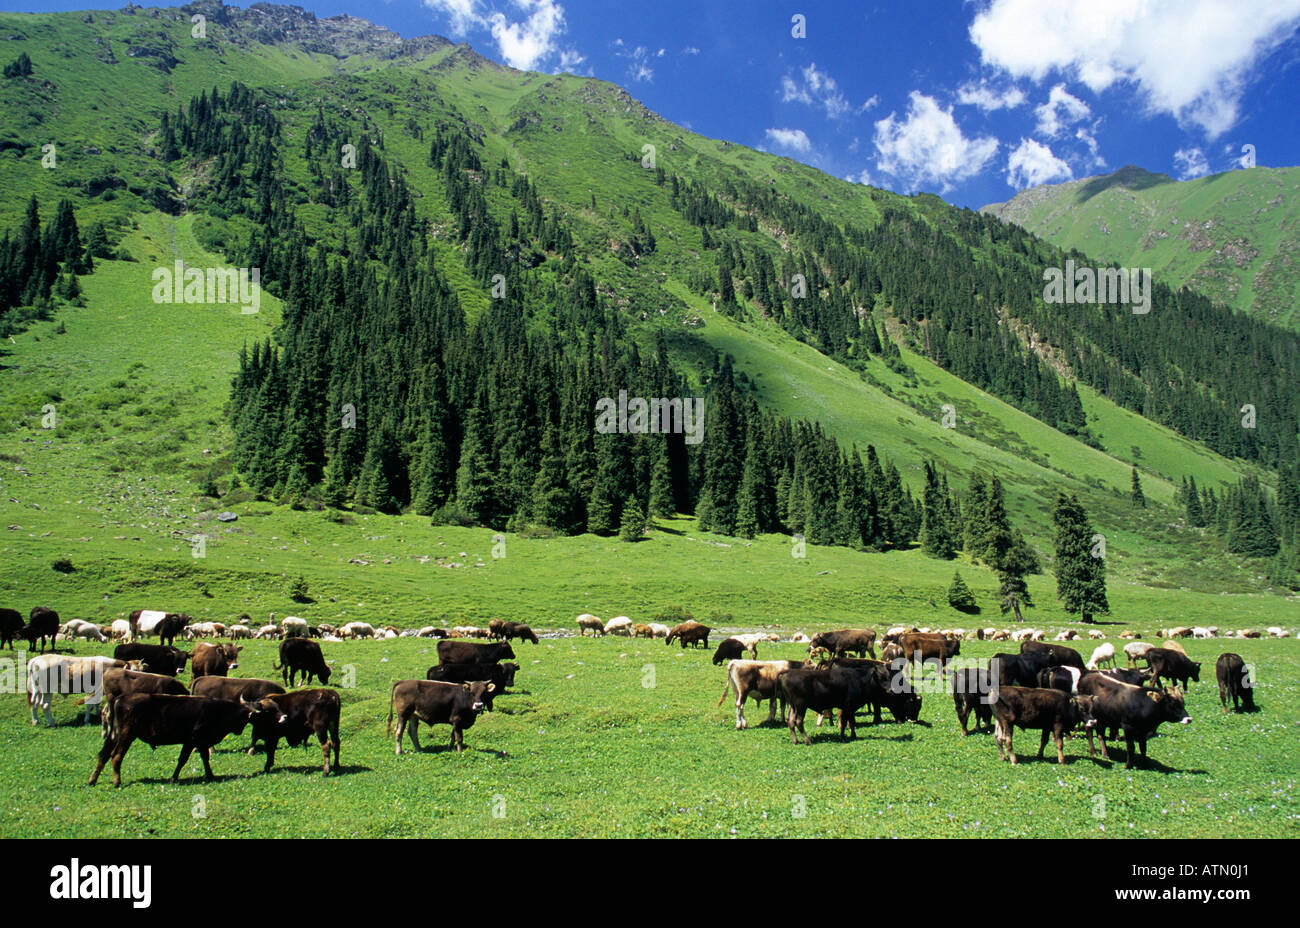 Altyn Arashan valley with herd of cattle Terskey Alatau Mountains Tian Shan Kyrgyzstan Stock Photo